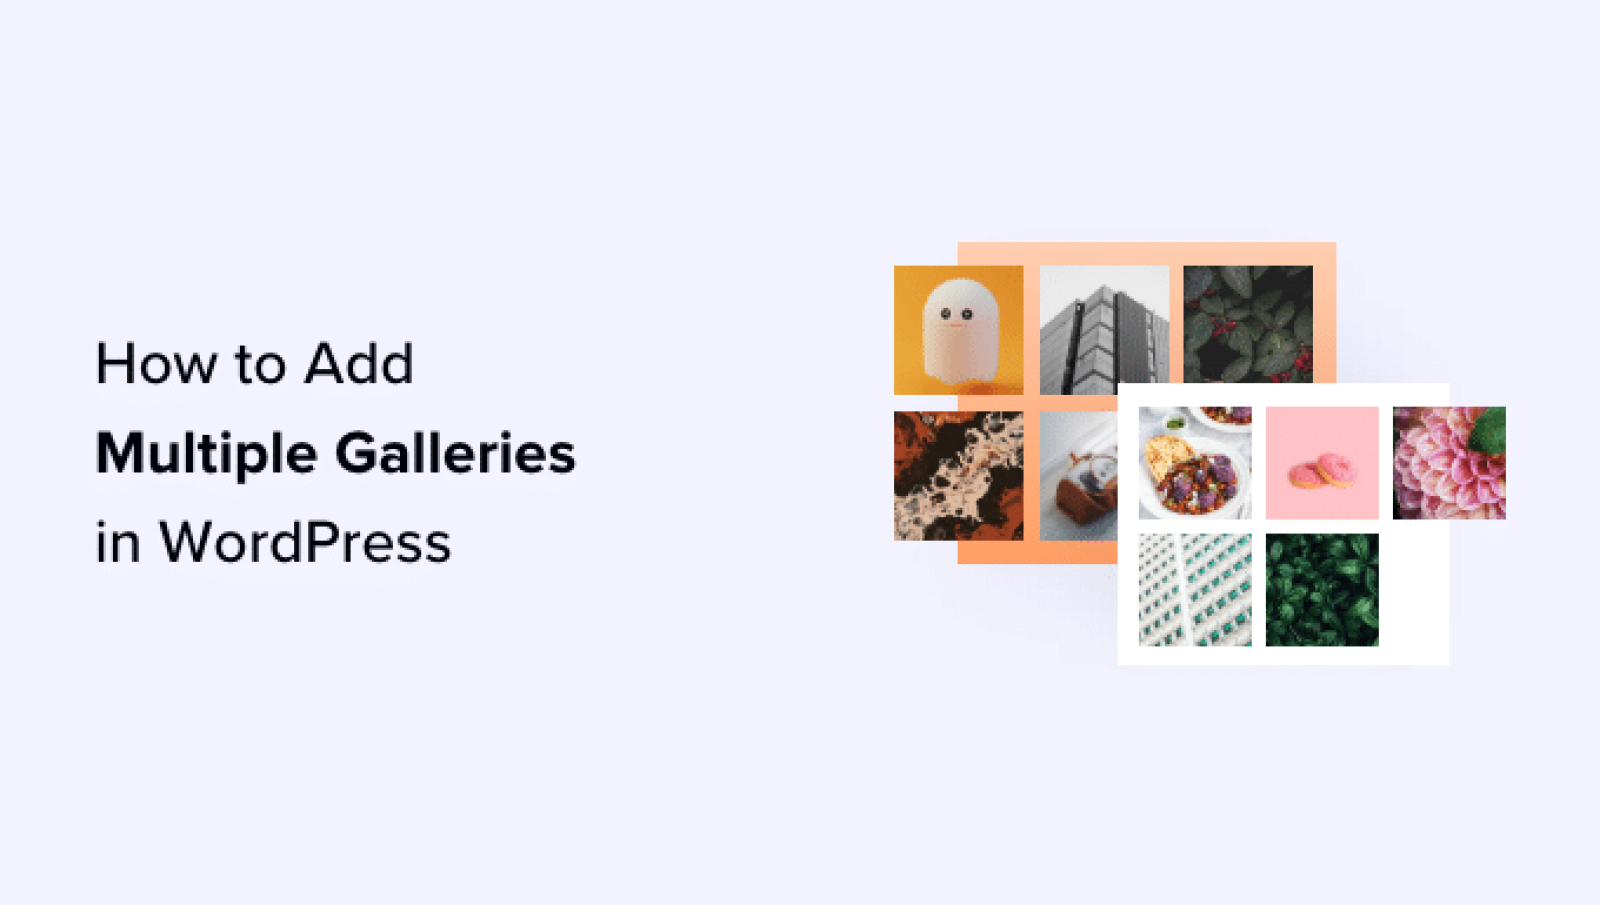 Learn how to Add A number of Galleries in WordPress Posts and Pages